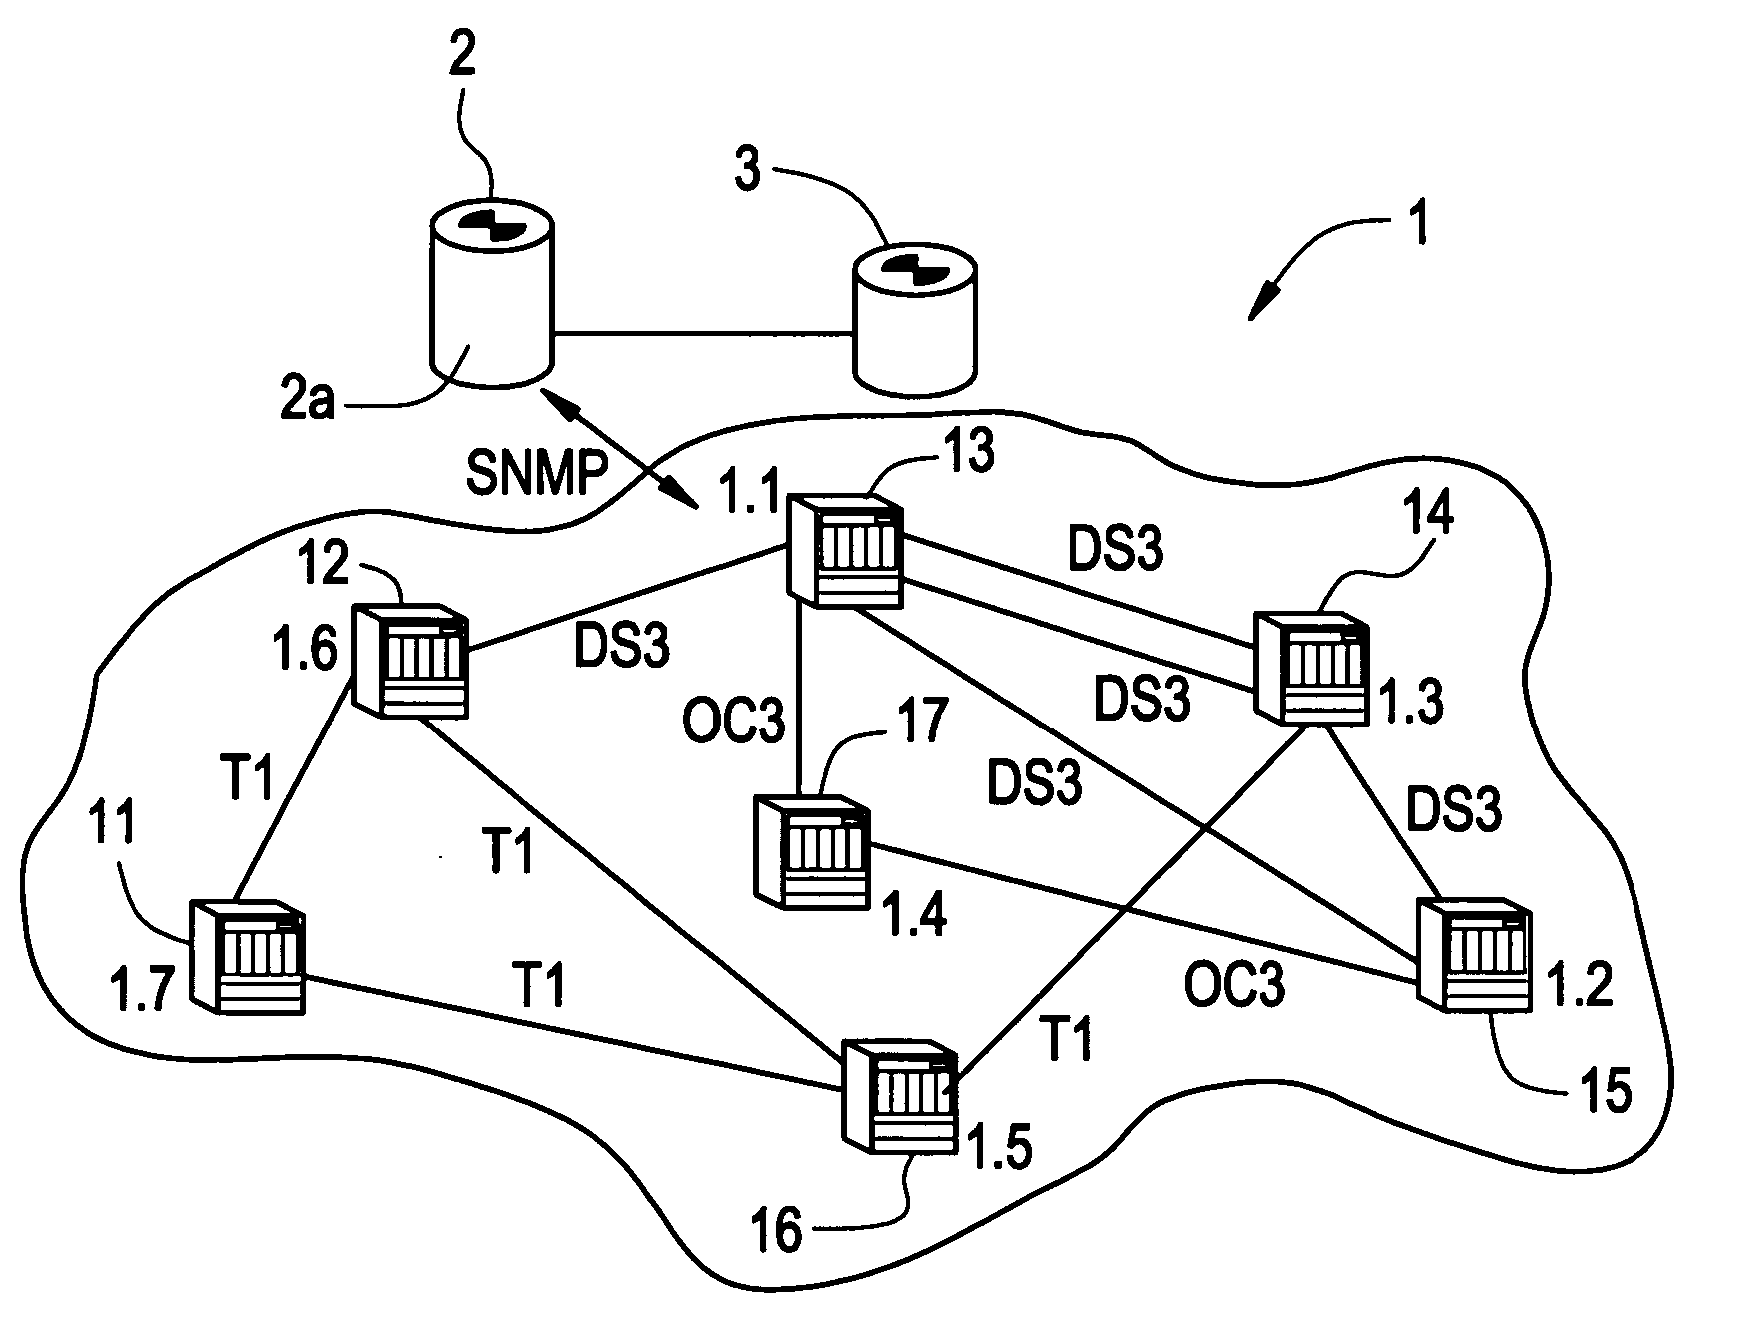 Methods and systems for alleviating congestion in a connection-oriented data network